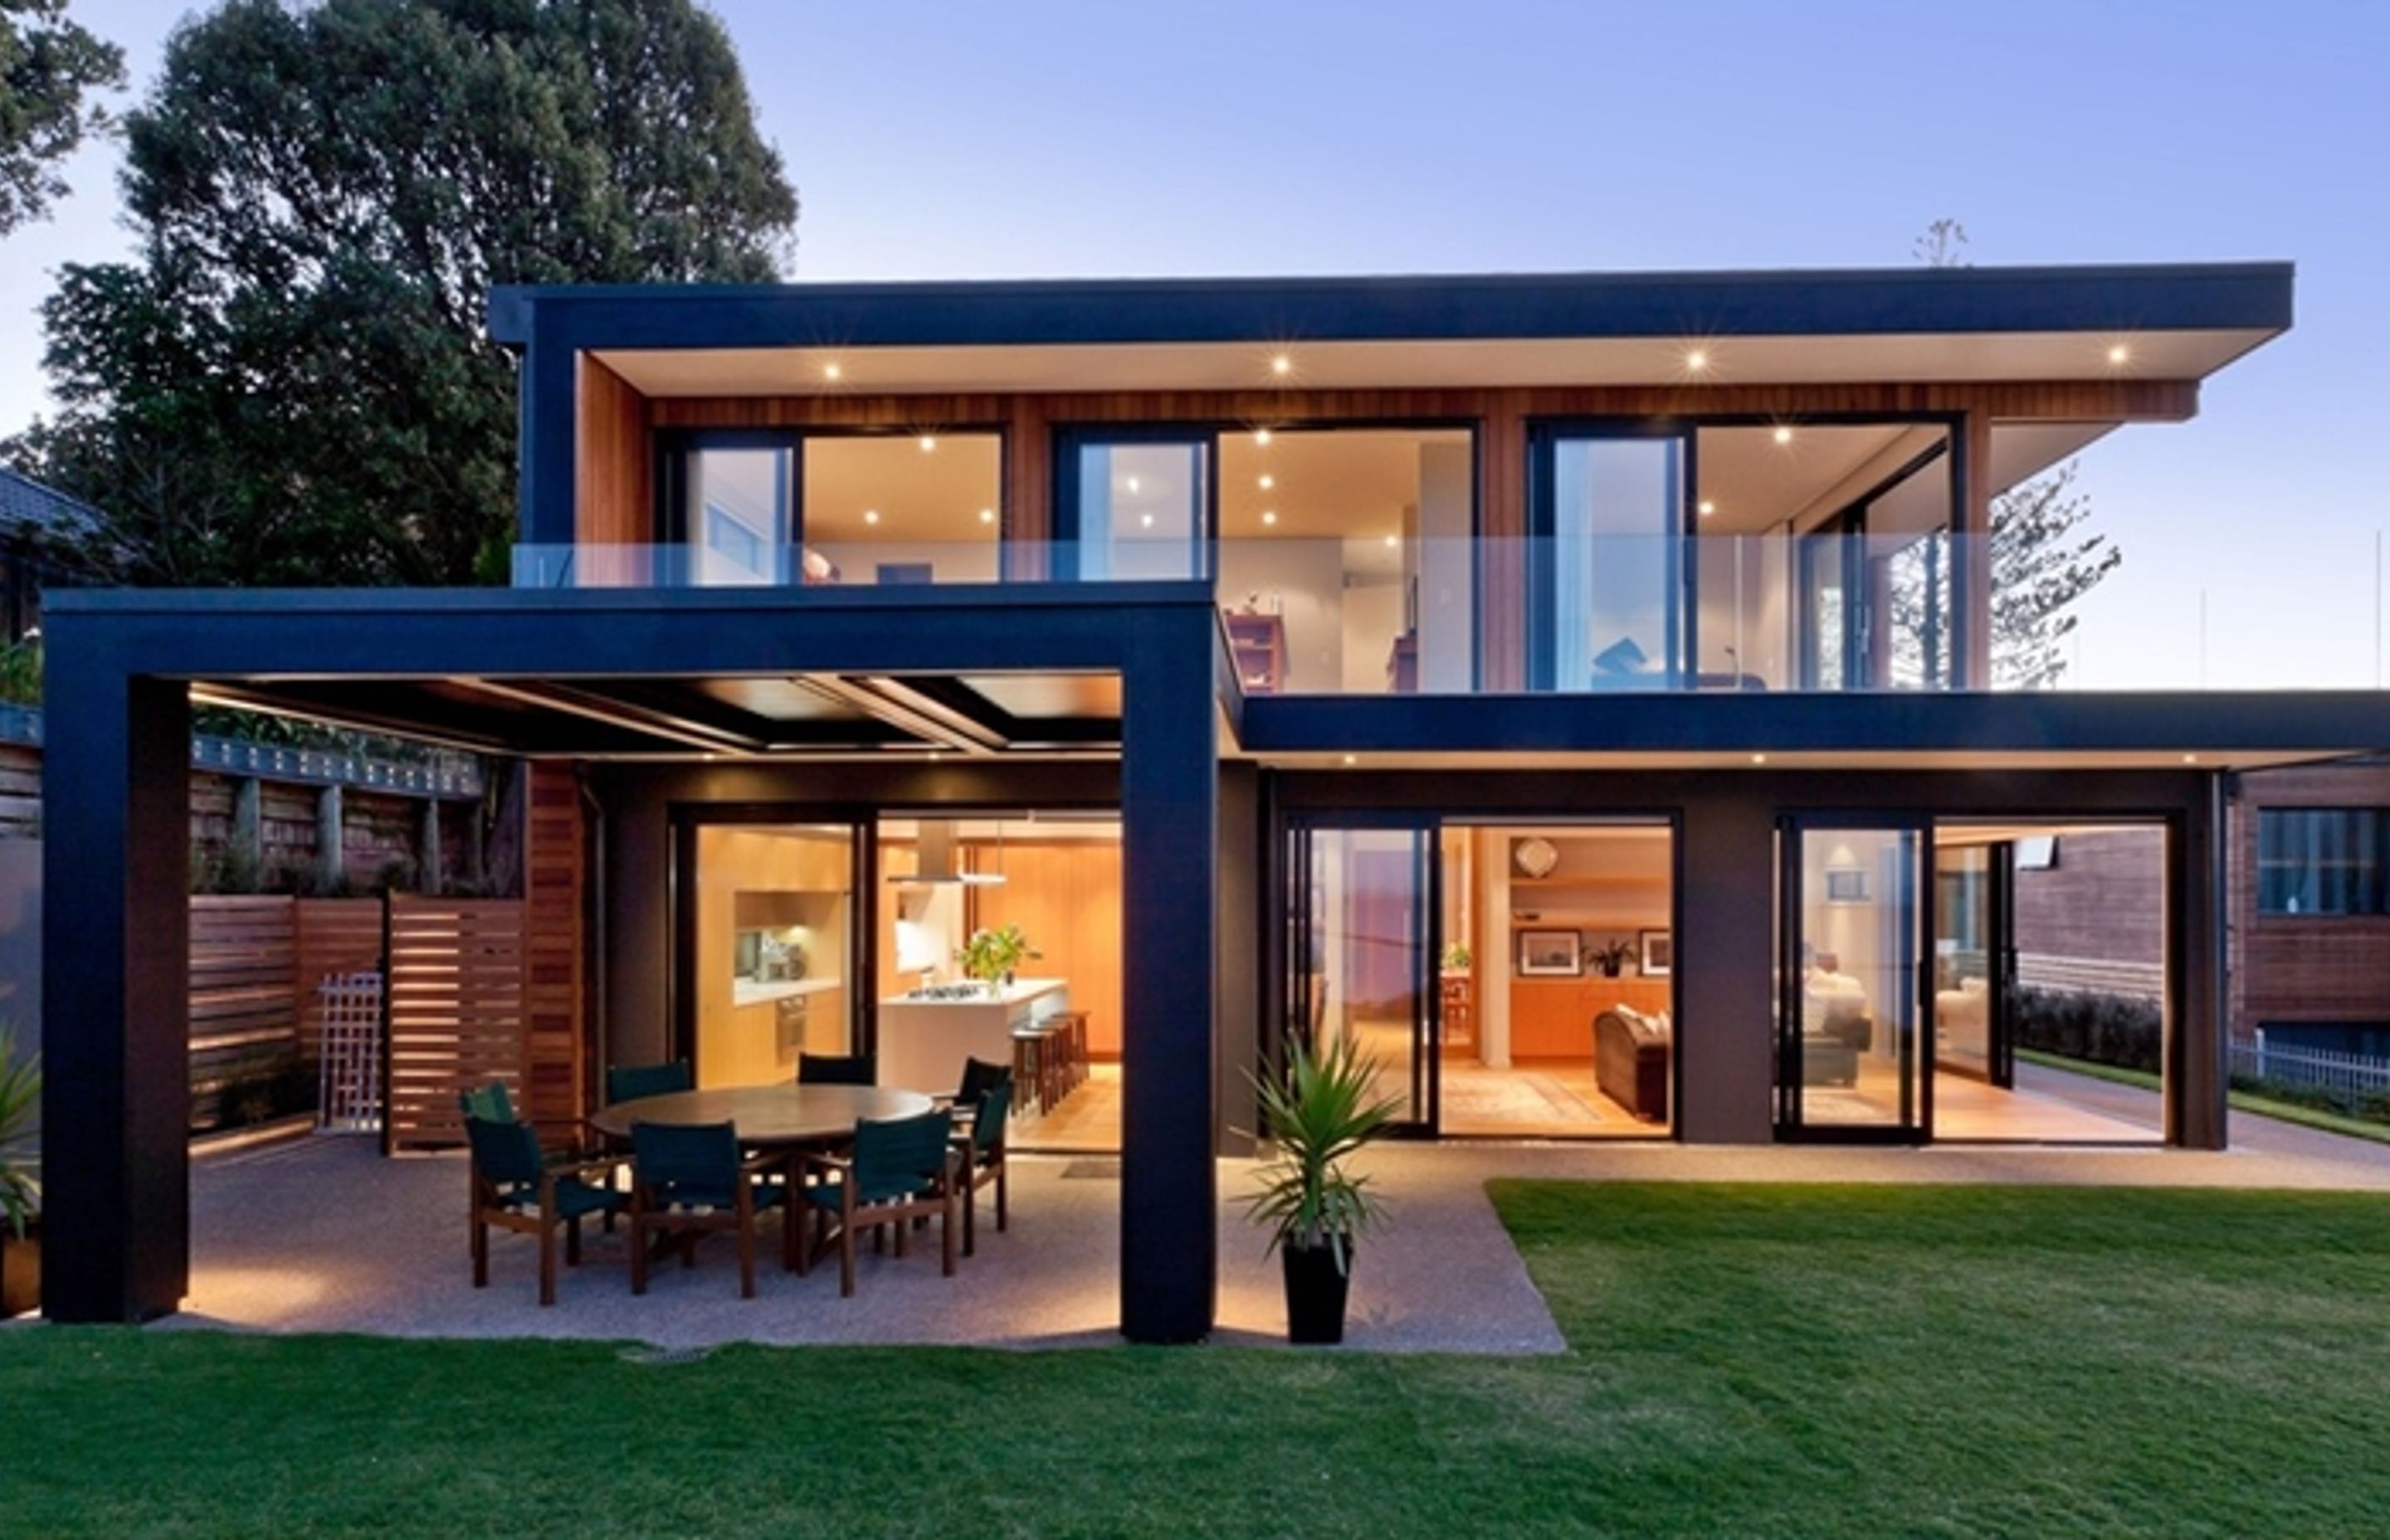 Rothesay Bay House by Creative Arch: One example of NZ's stunning architecture.